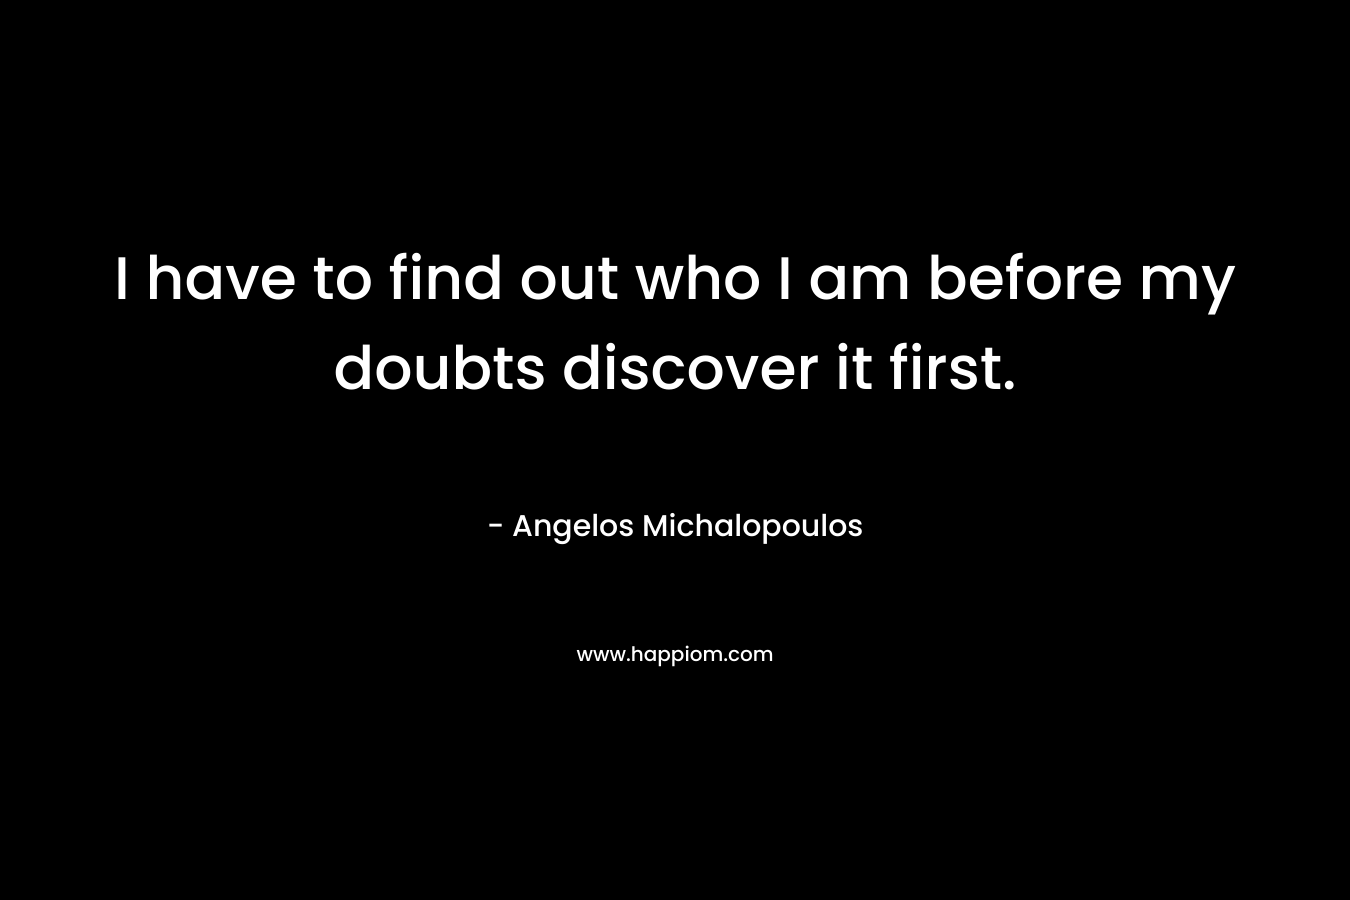 I have to find out who I am before my doubts discover it first.